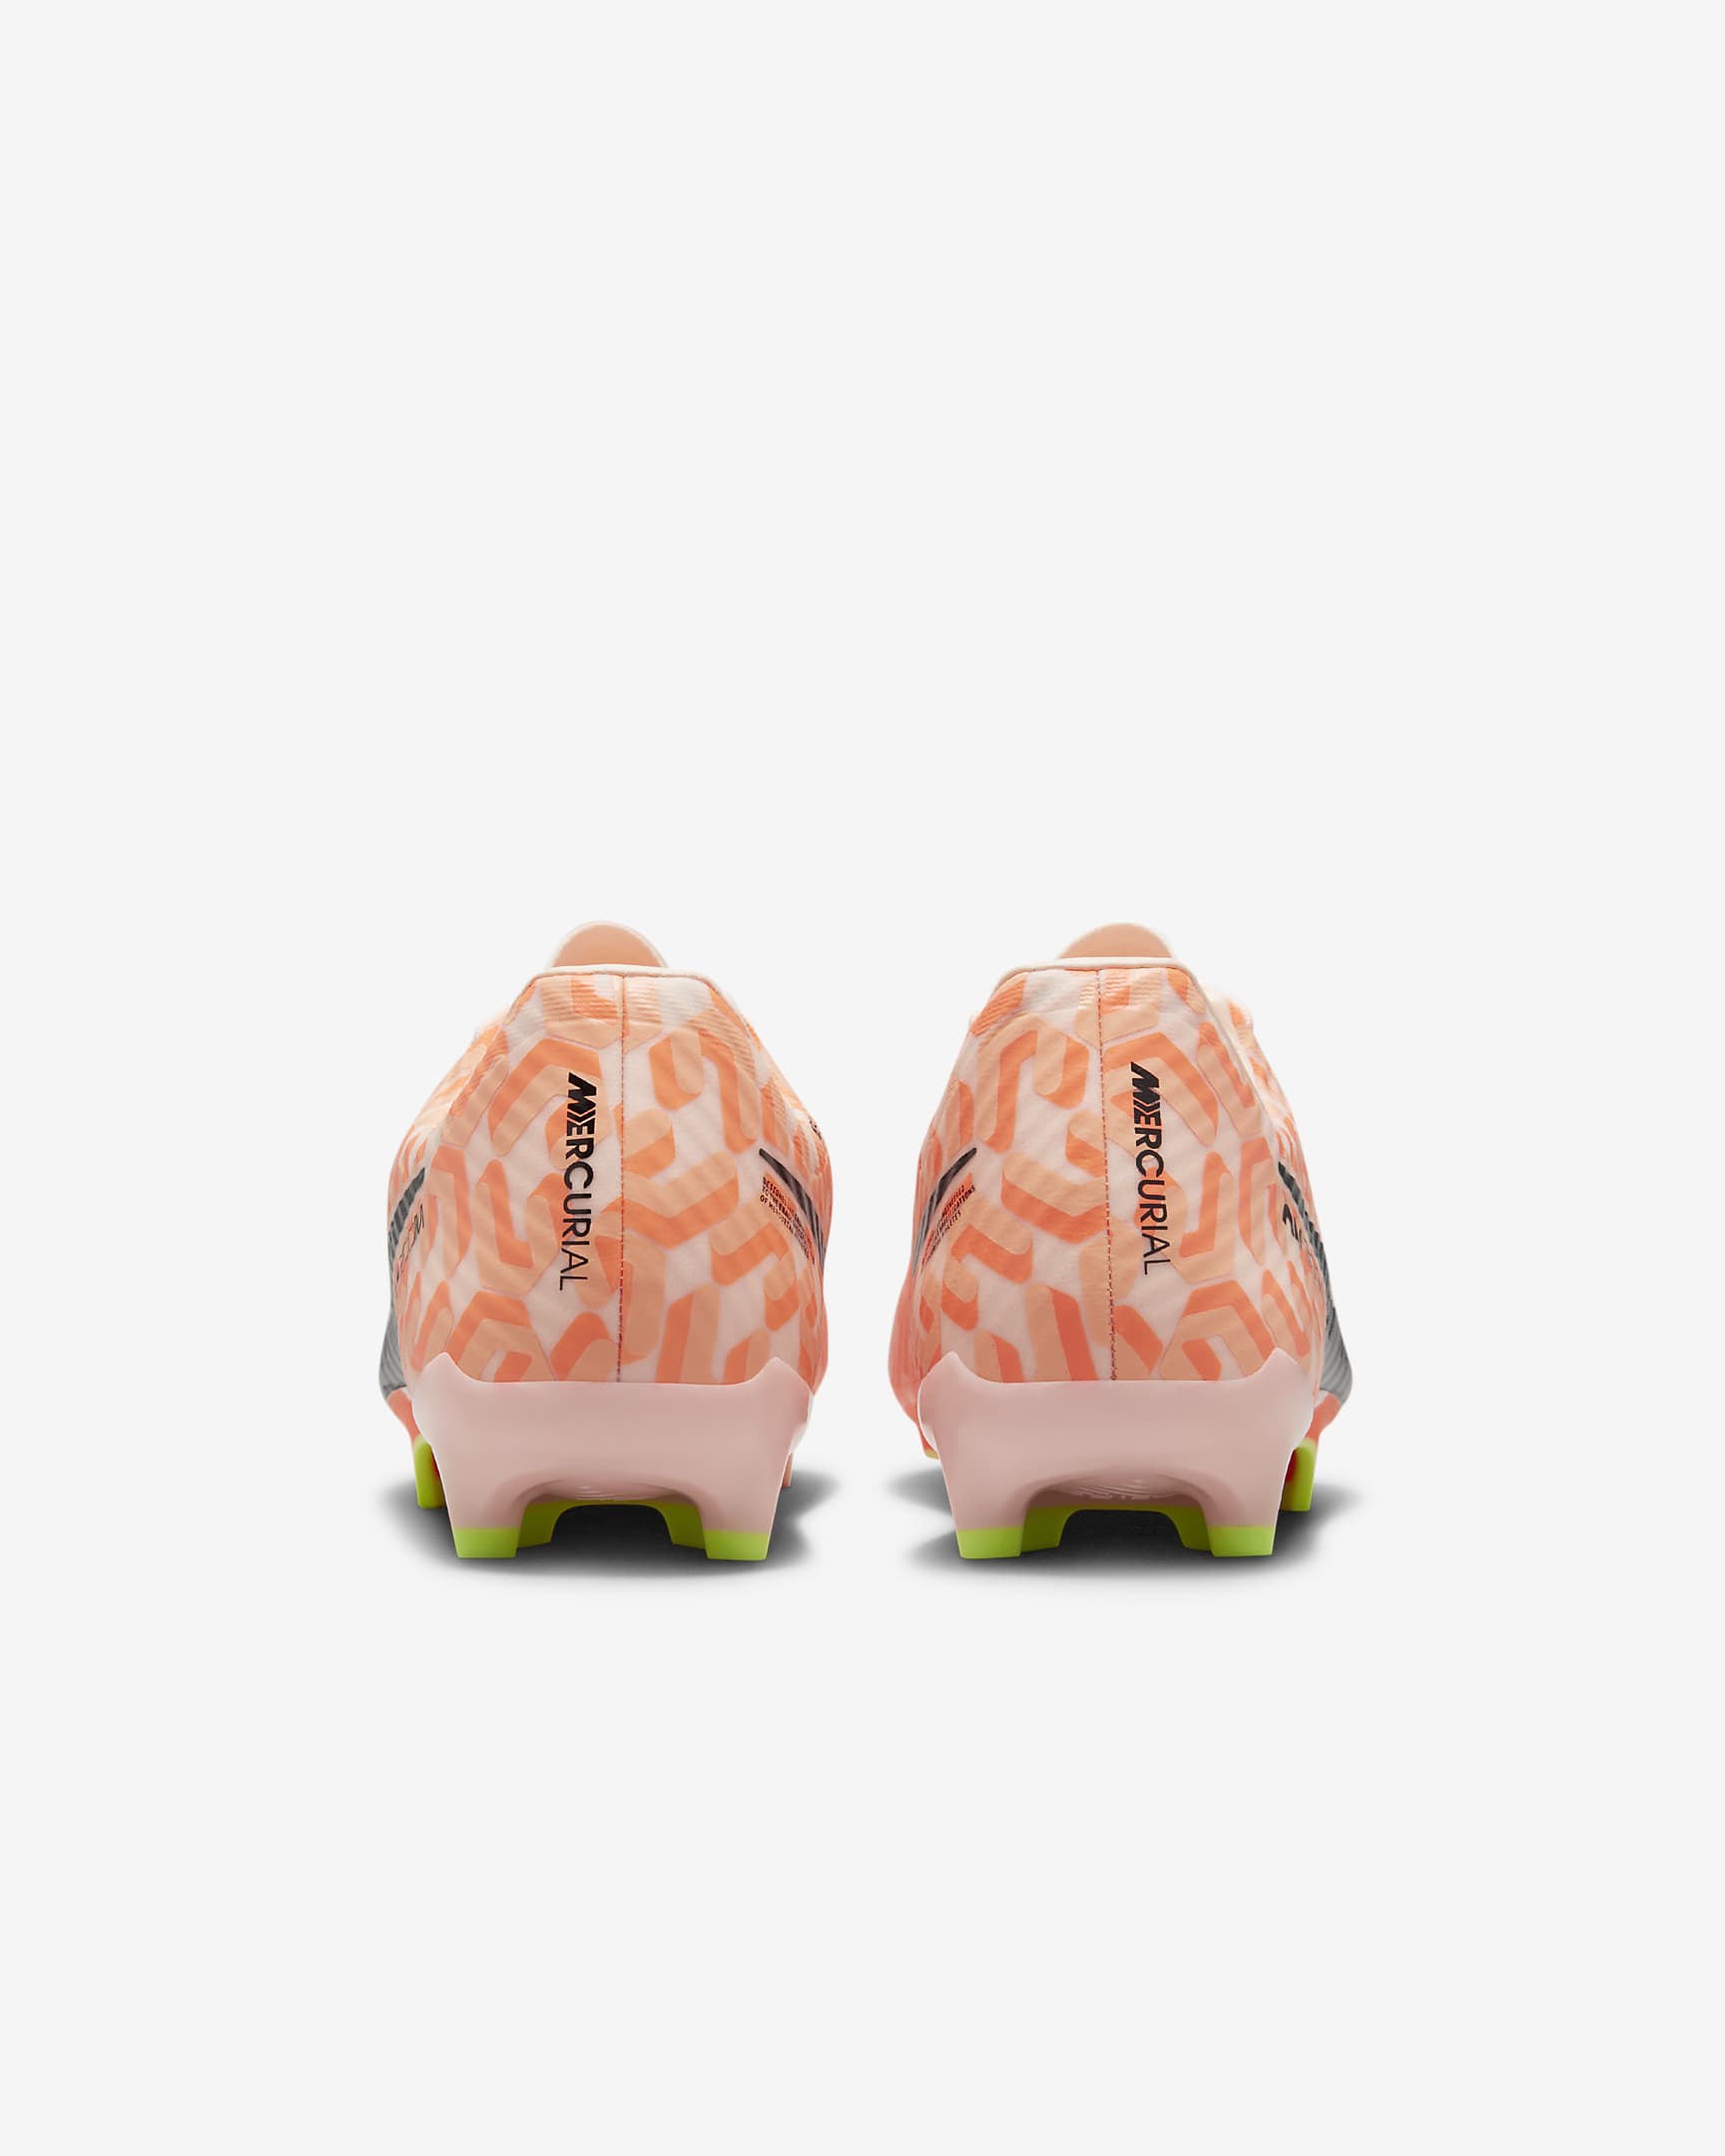 Nike Mercurial Vapor 15 Academy Multi-Ground Low Top Soccer Cleats ...